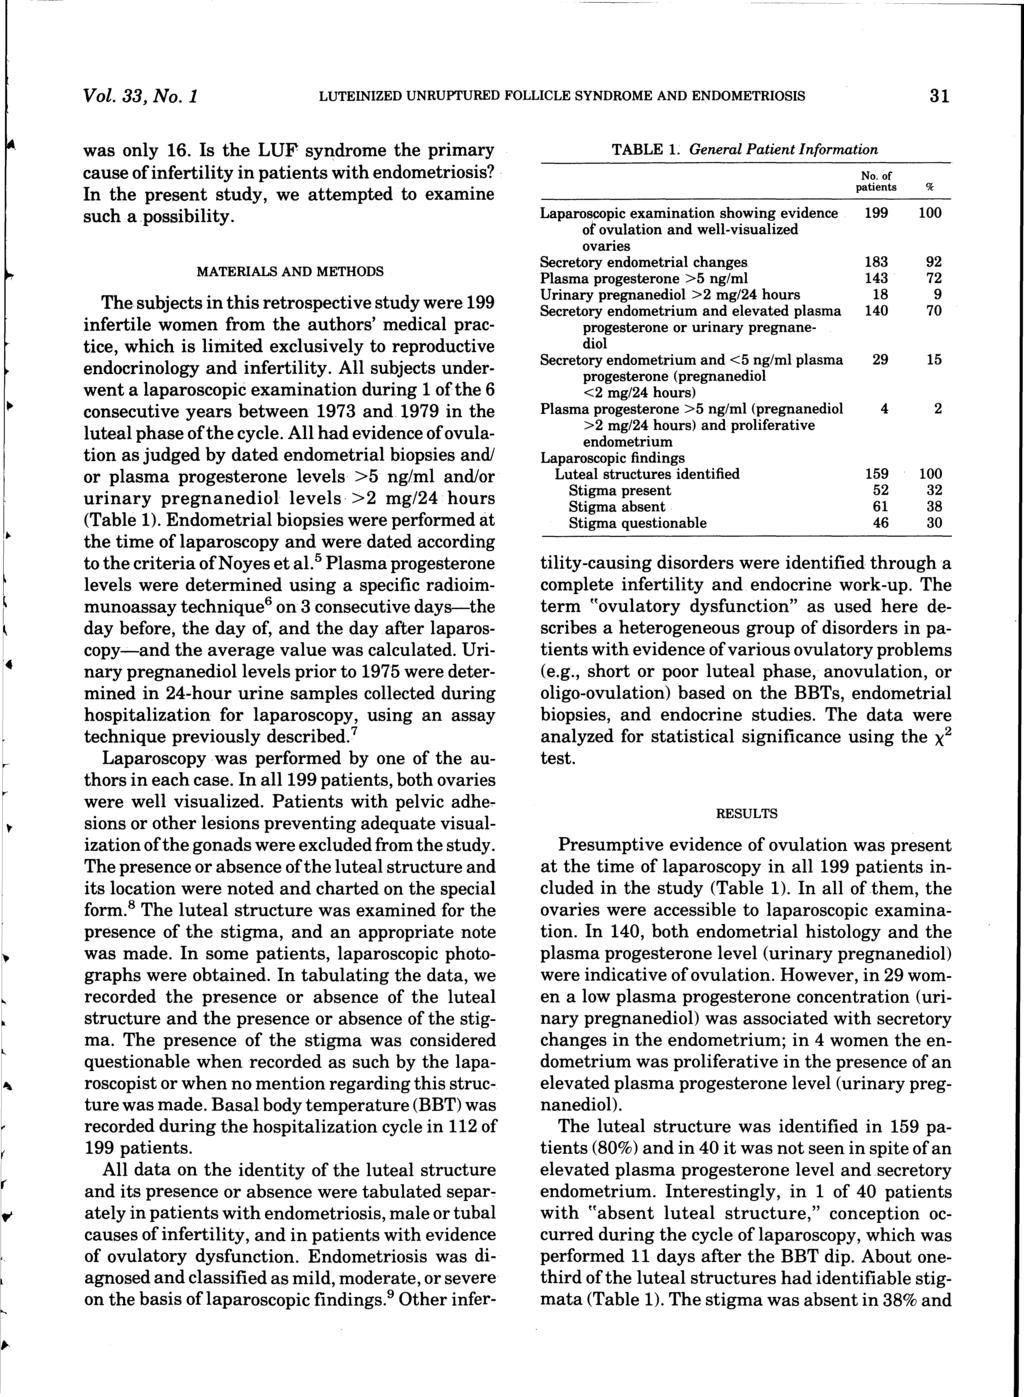 Vol. 33, LUTEINIZED UNRUPTURED FOLLICLE SYNDROME AND ENDOMETRIOSIS 3 was only 6. Is the LUF syndrome the primary cause of infertility in patients with endometriosis?